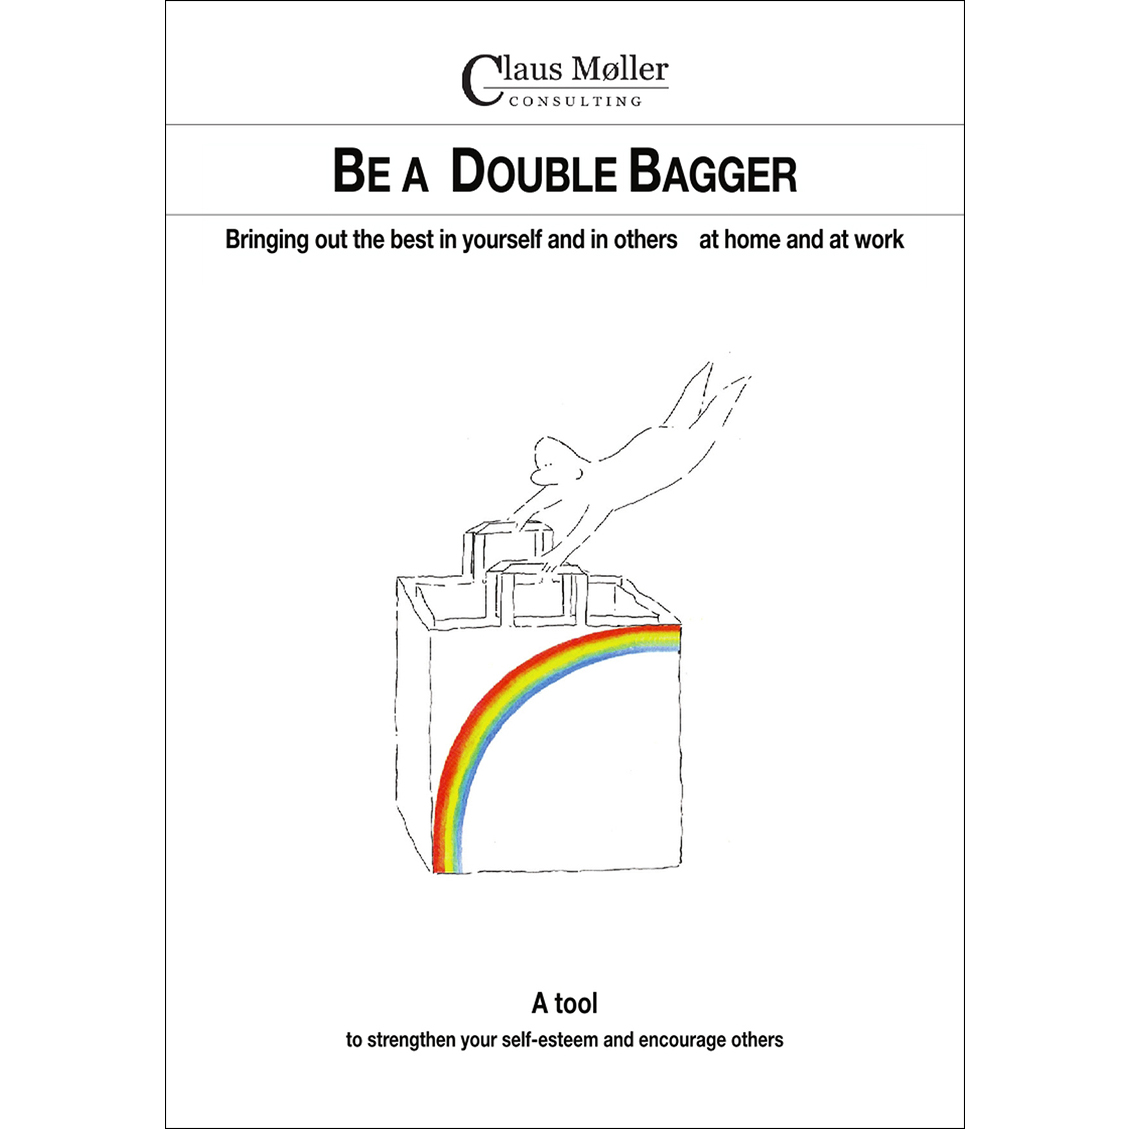 Be a double bagger